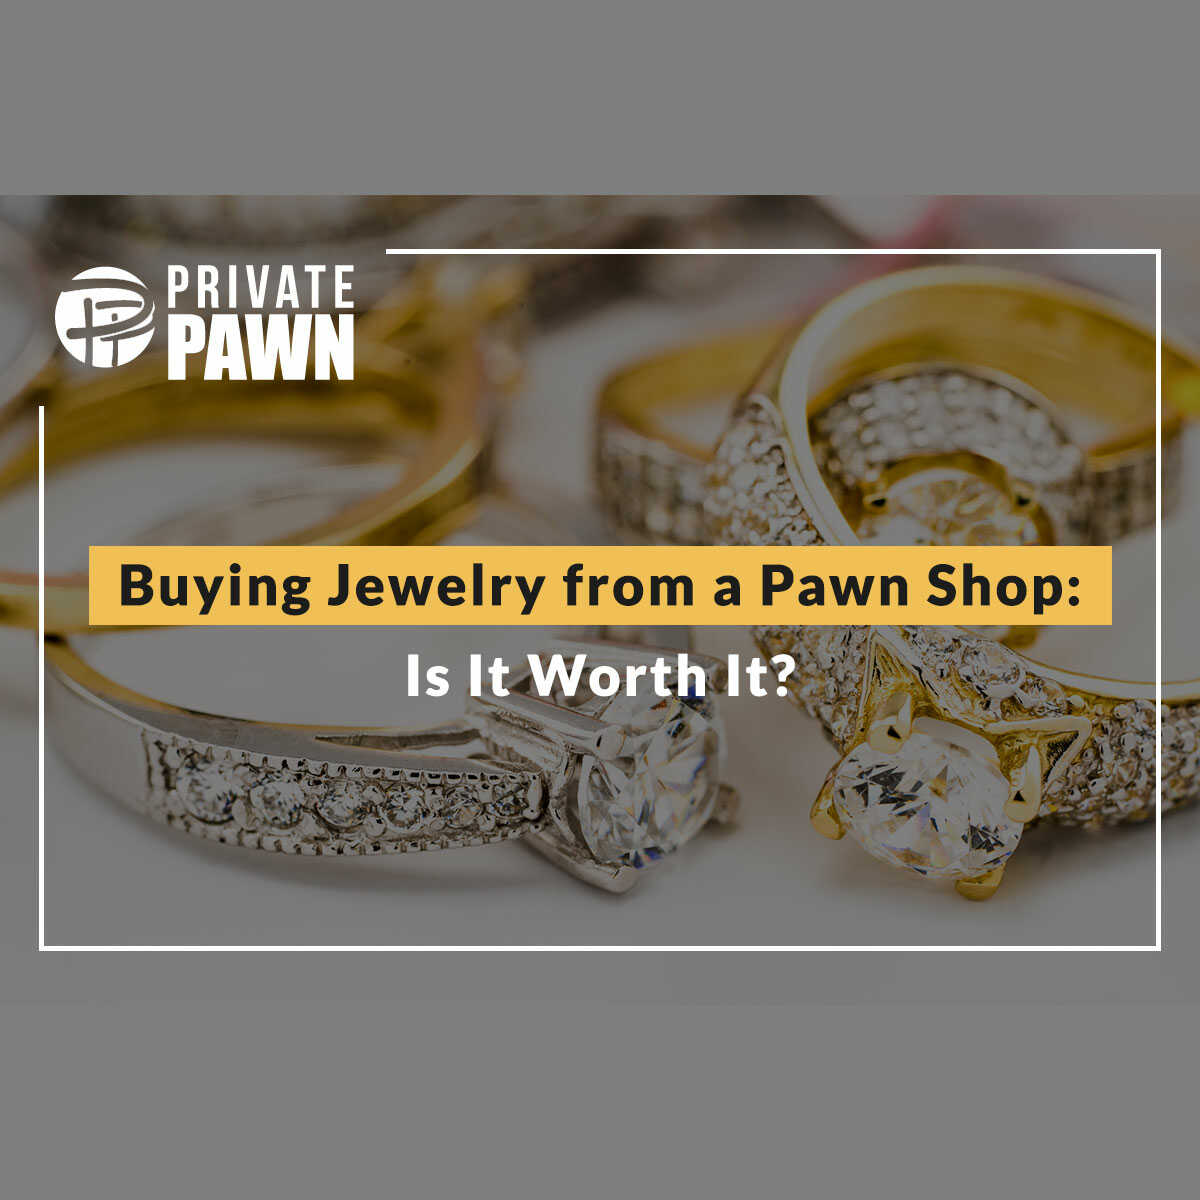 Buying Jewelry From a Pawn Shop: Is It Worth It?